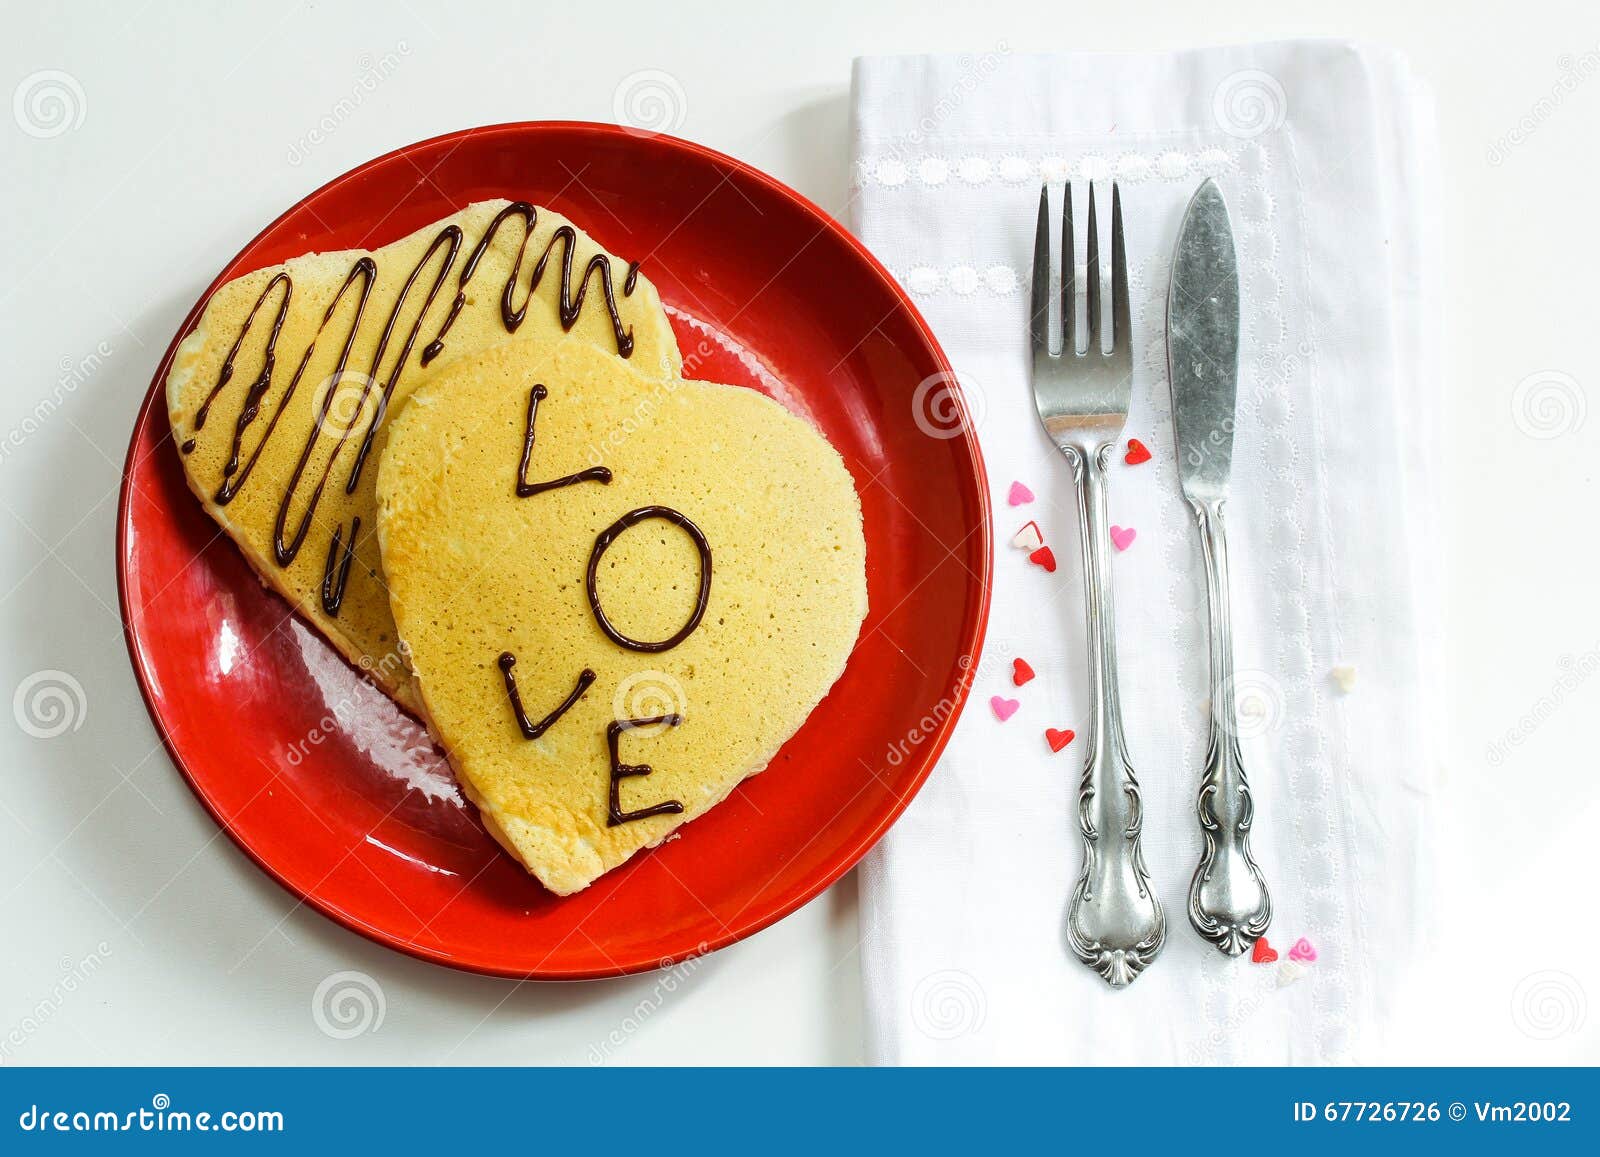 Heart Shaped Pancake for Valentines Day Stock Photo - Image of ...